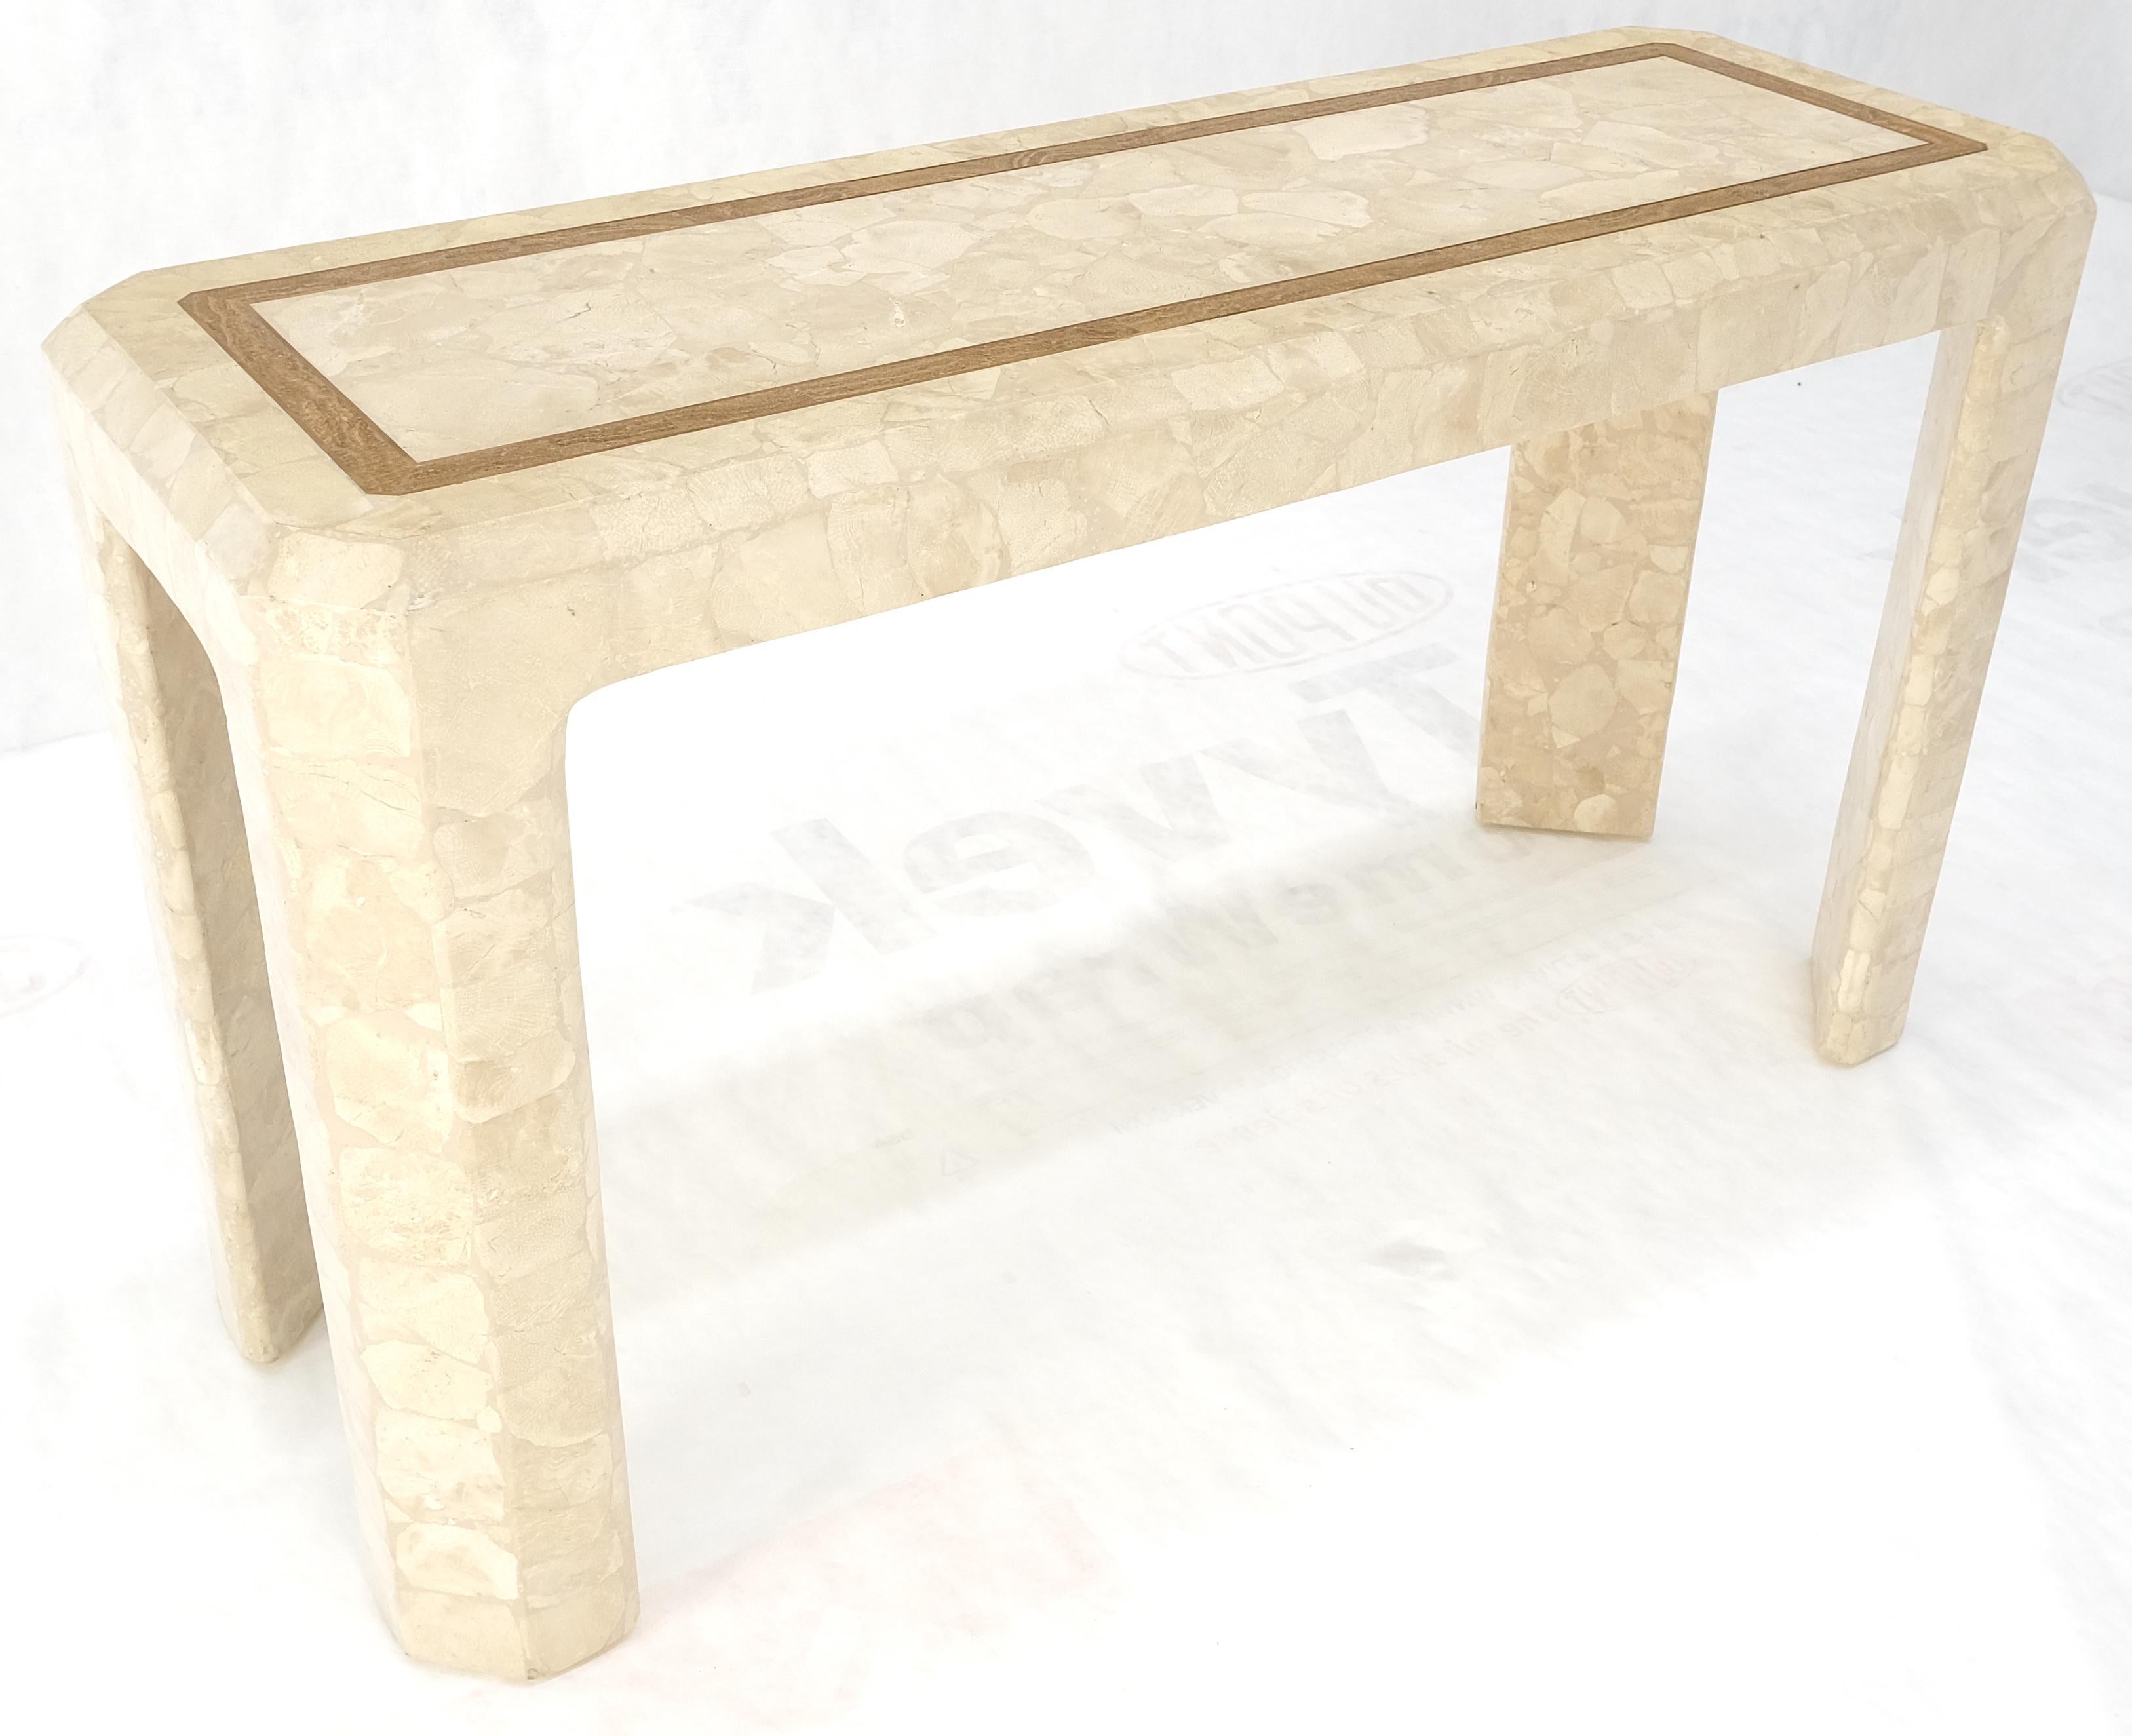 Tessellated Travertine Inlayed Top Console Sofa Table Mid Century Modern MINT! For Sale 3